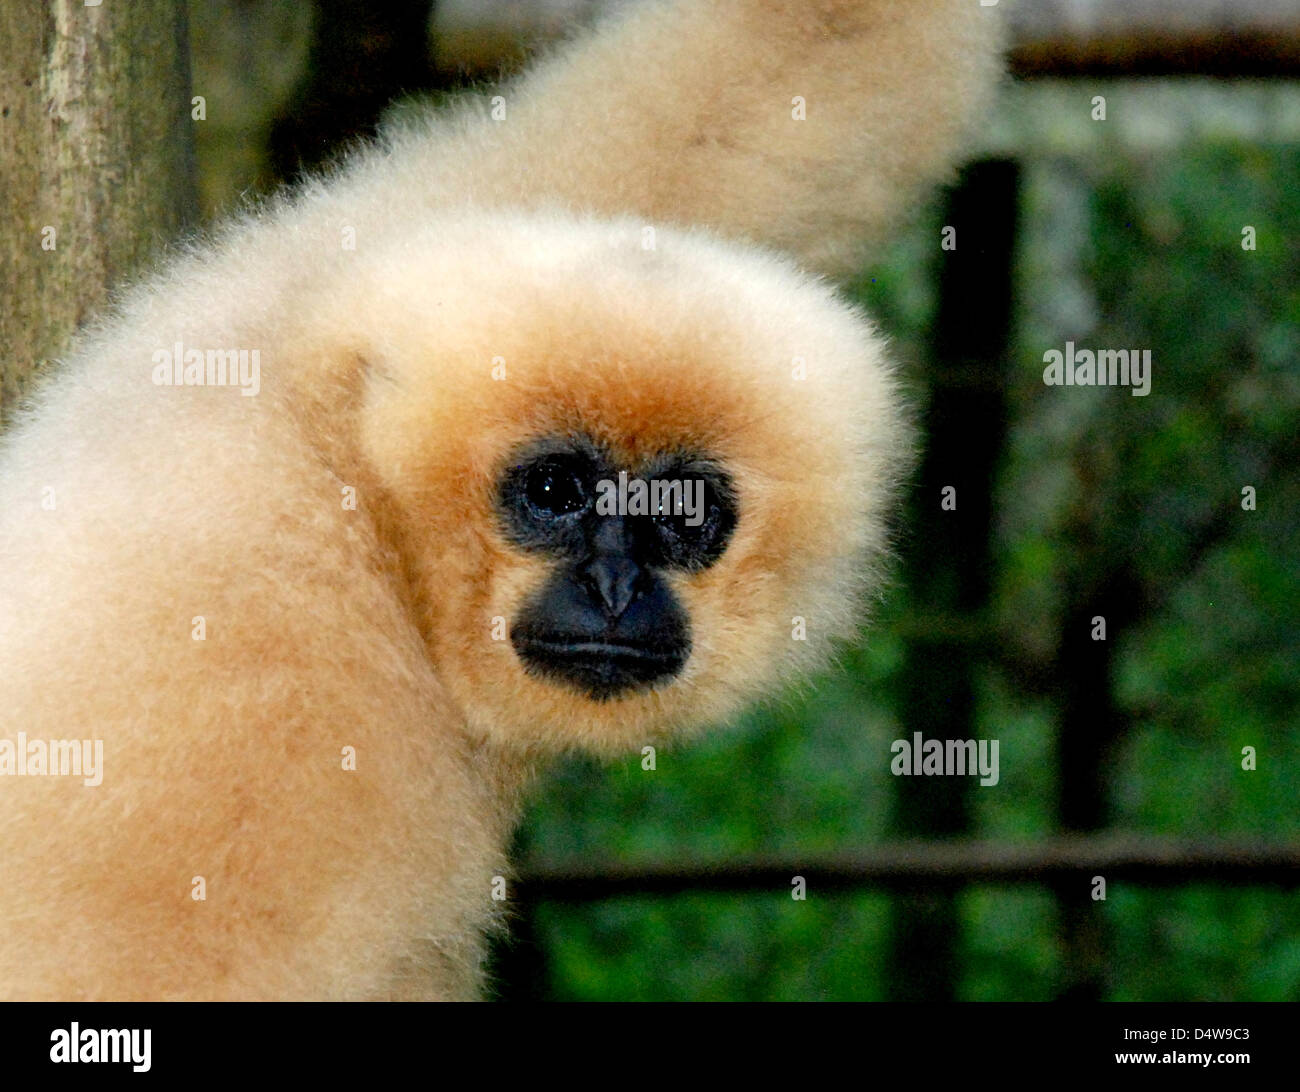 An undated Endangered Primate Rescue Center handout of a Yello-cheeked gibbon in the djungle of Vietnam. Scientists of German Primate Centre (DPZ) discovered a new kind of gibbon species that lives in the remote mountains between Vietnam, Laos and Cambodia. Analyses of DNA and chanting revealed that it is a seperate gibbon species. Photo: TILO NADLER, ENDANGERED PRIMATE RESCUE CENT Stock Photo